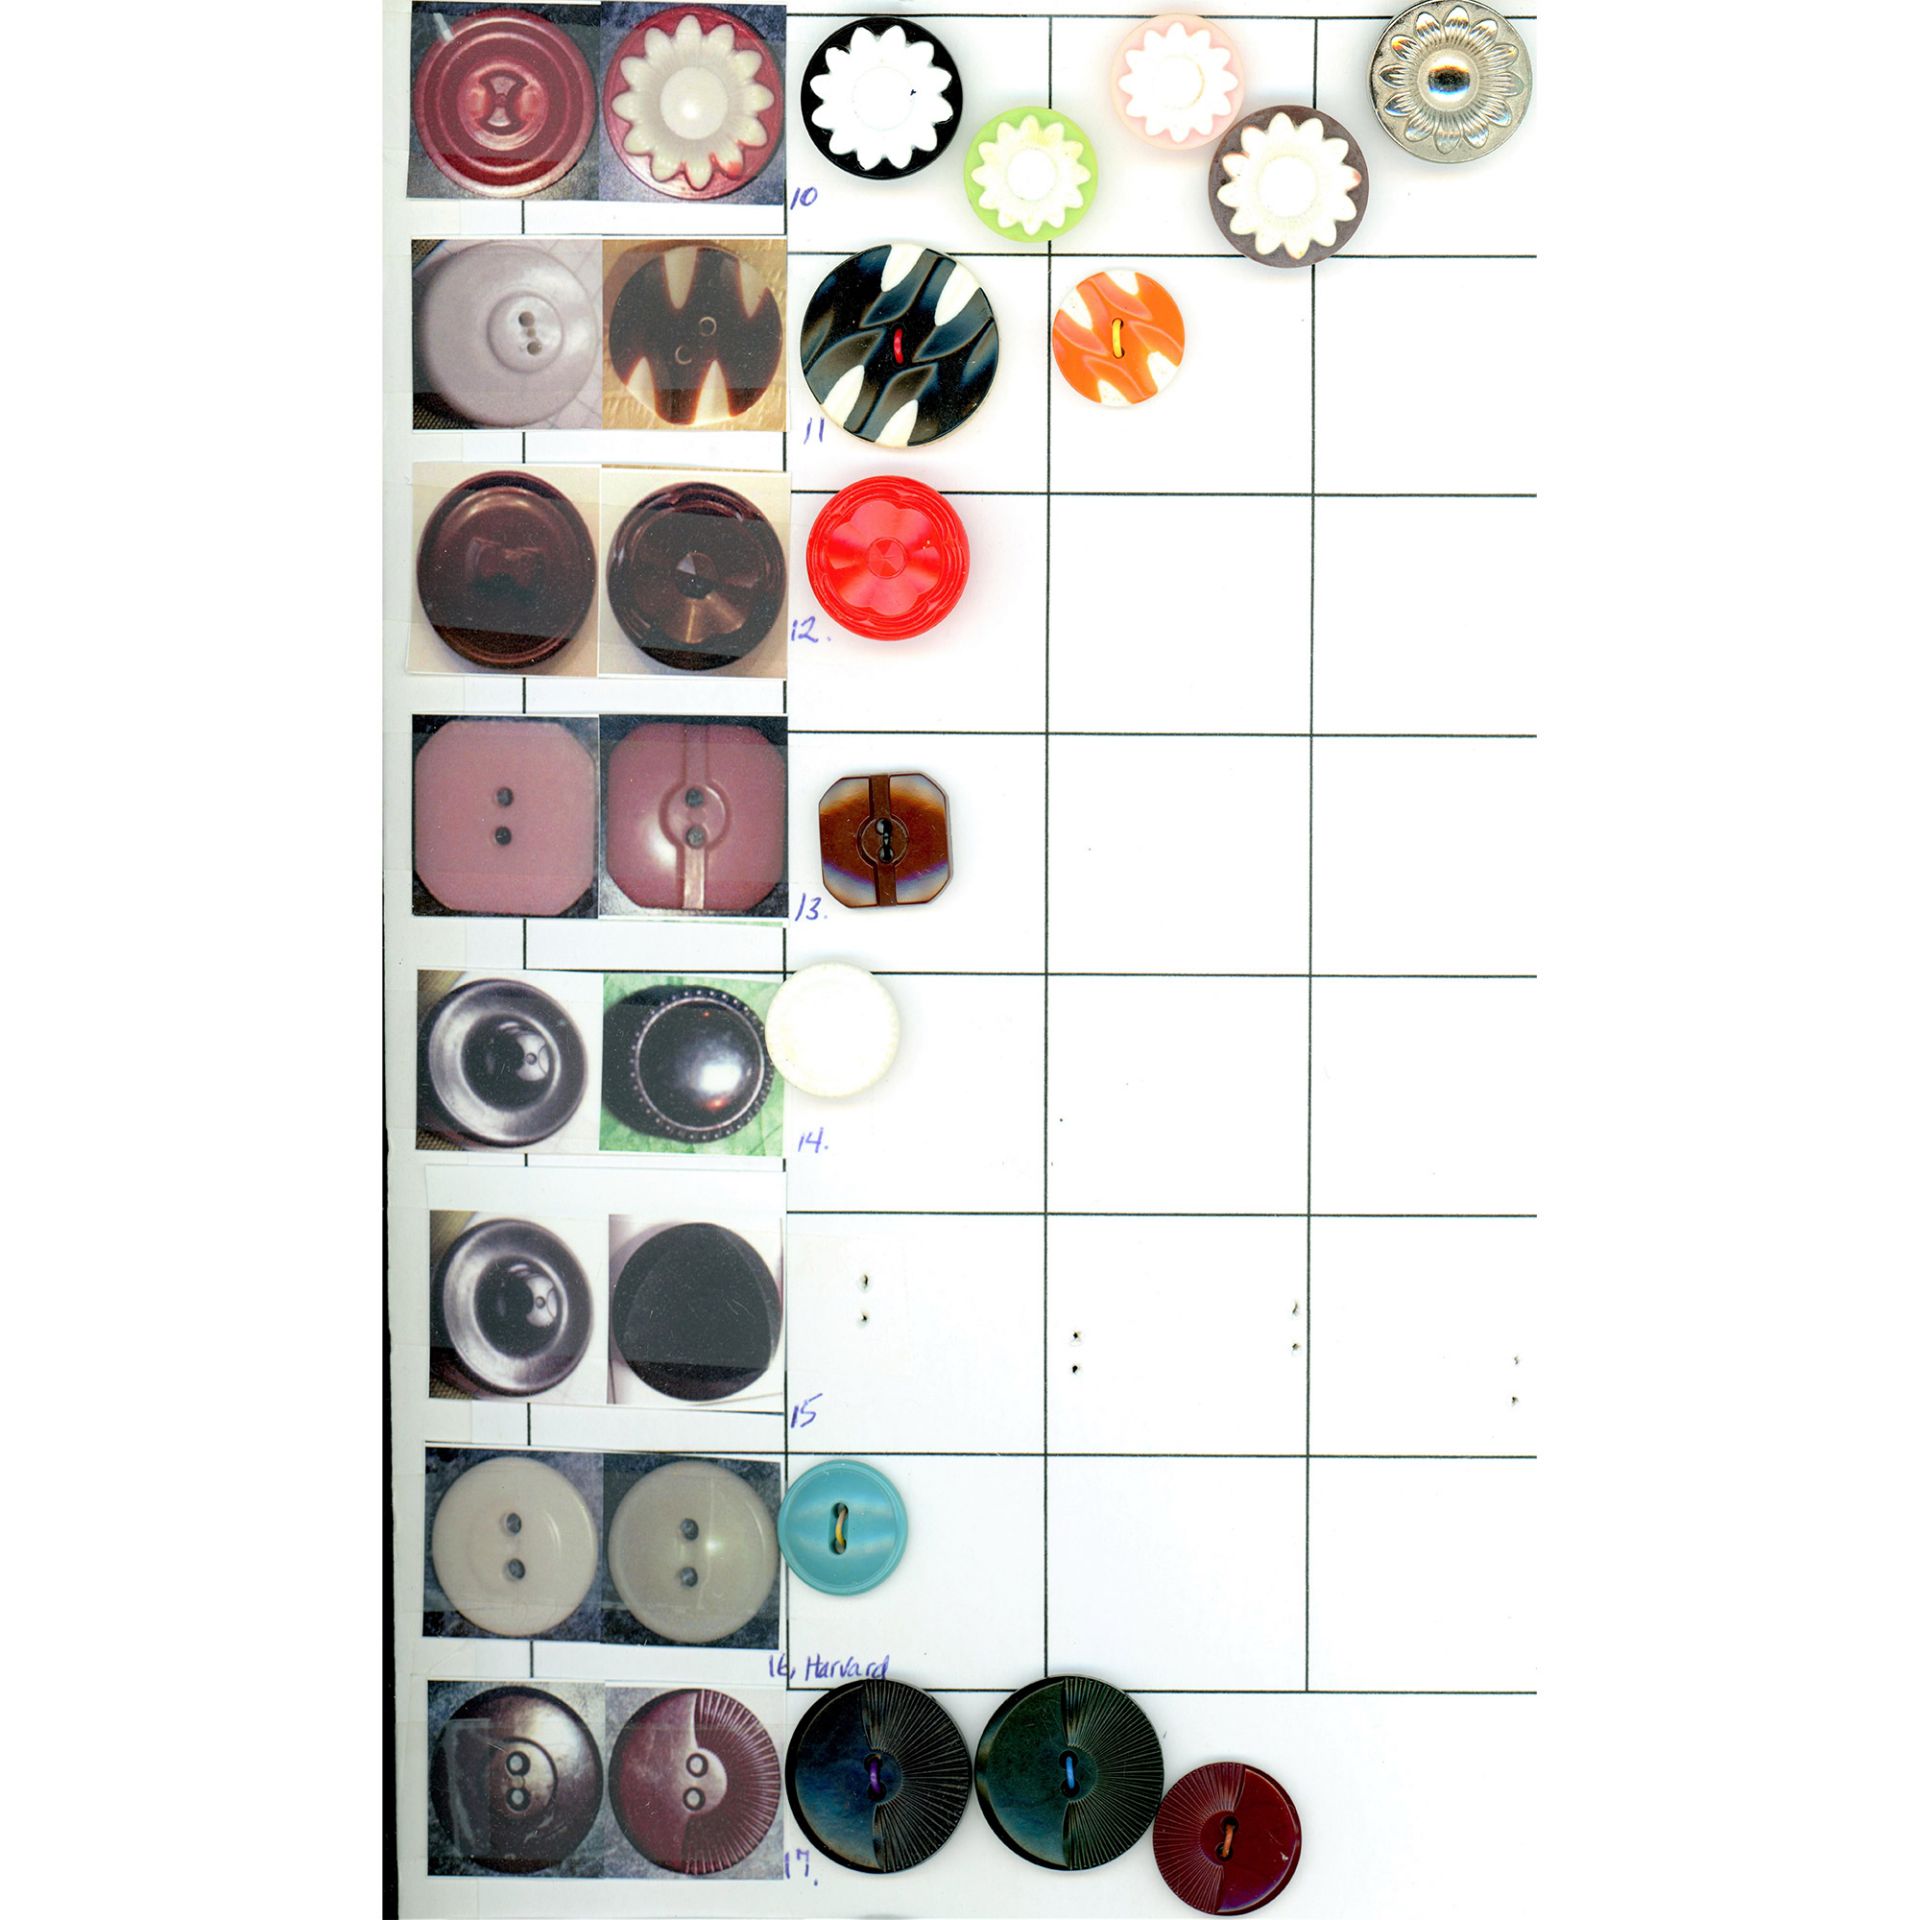 10 Cards of Division Three Colorful Plastic Buttons - Image 10 of 10